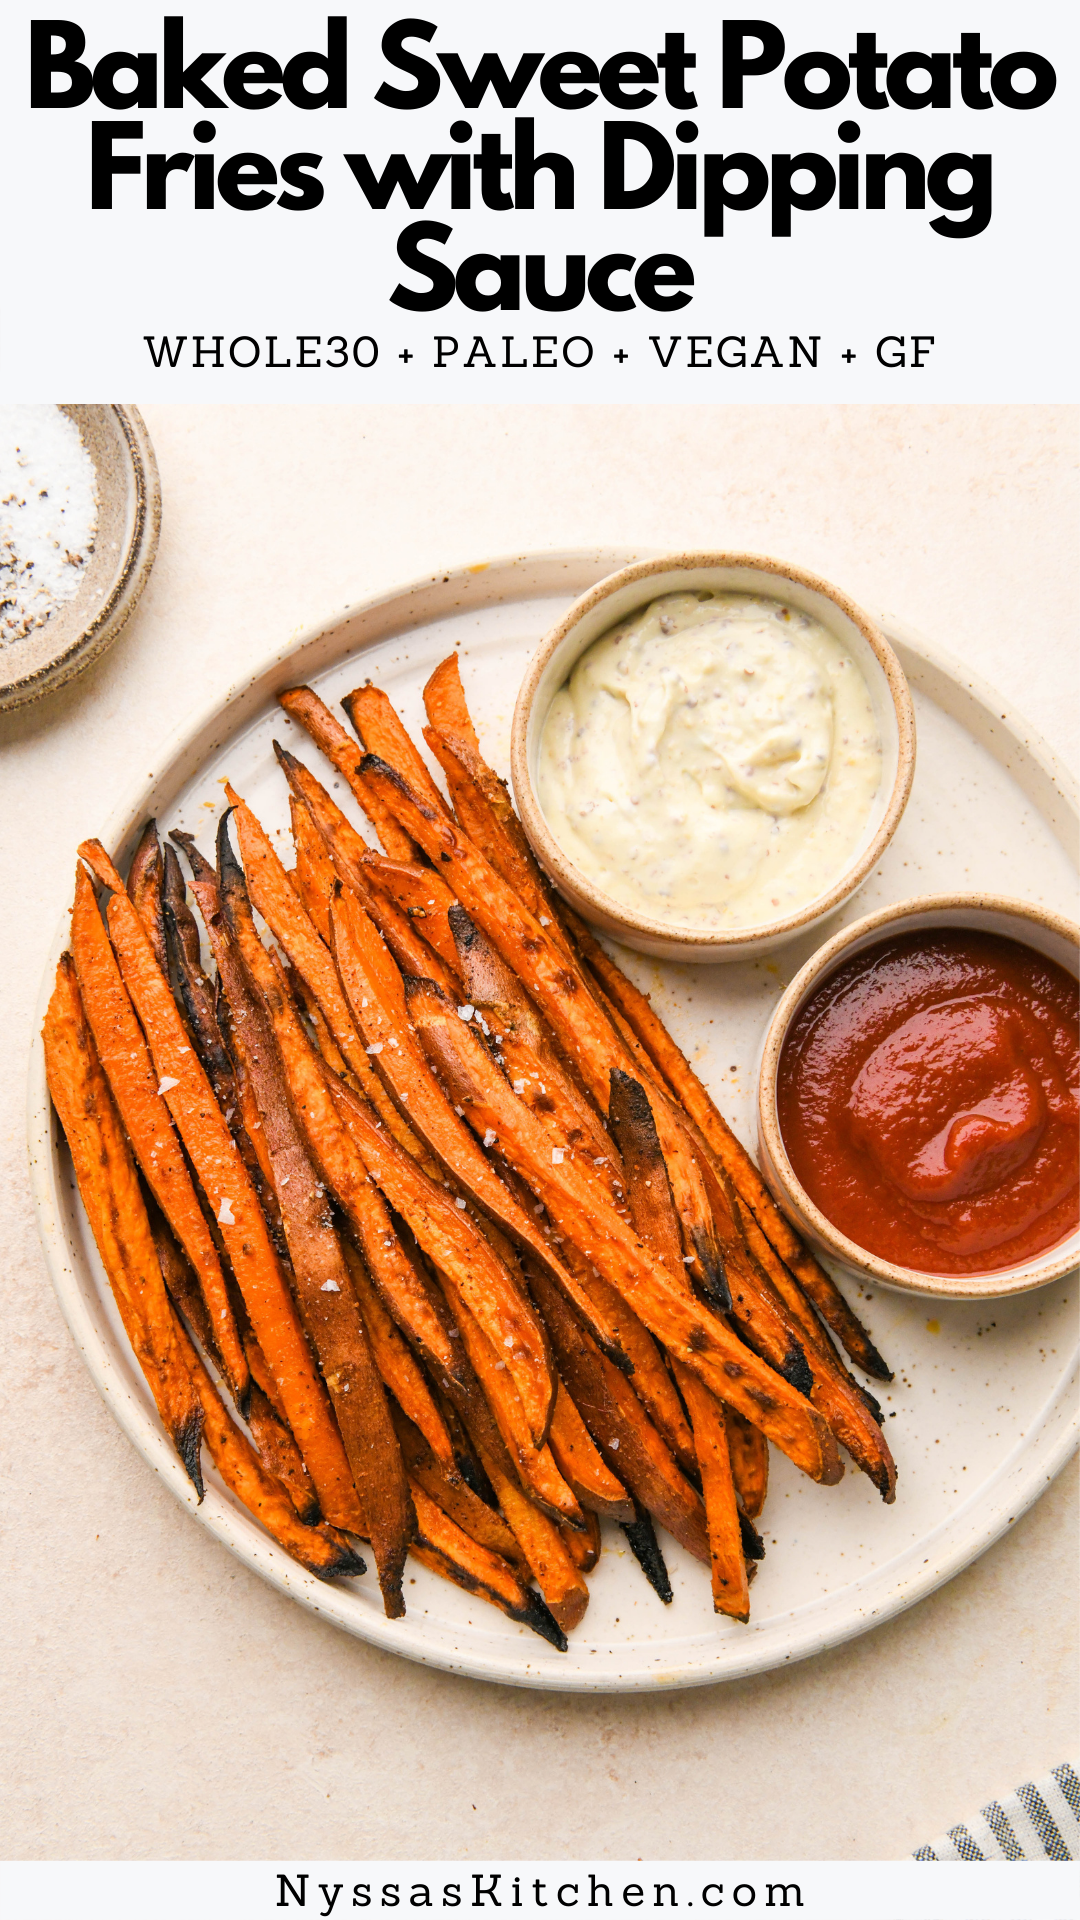 These healthy oven baked sweet potato fries are a tasty homemade snack that's super easy to make! Made with thinly cut sweet potatoes, avocado oil, and a blend of yummy seasonings. Roasted until crispy and delicious! Sauce recipe for dipping fries included in the blog post. Whole30, paleo, gluten free, and vegan.